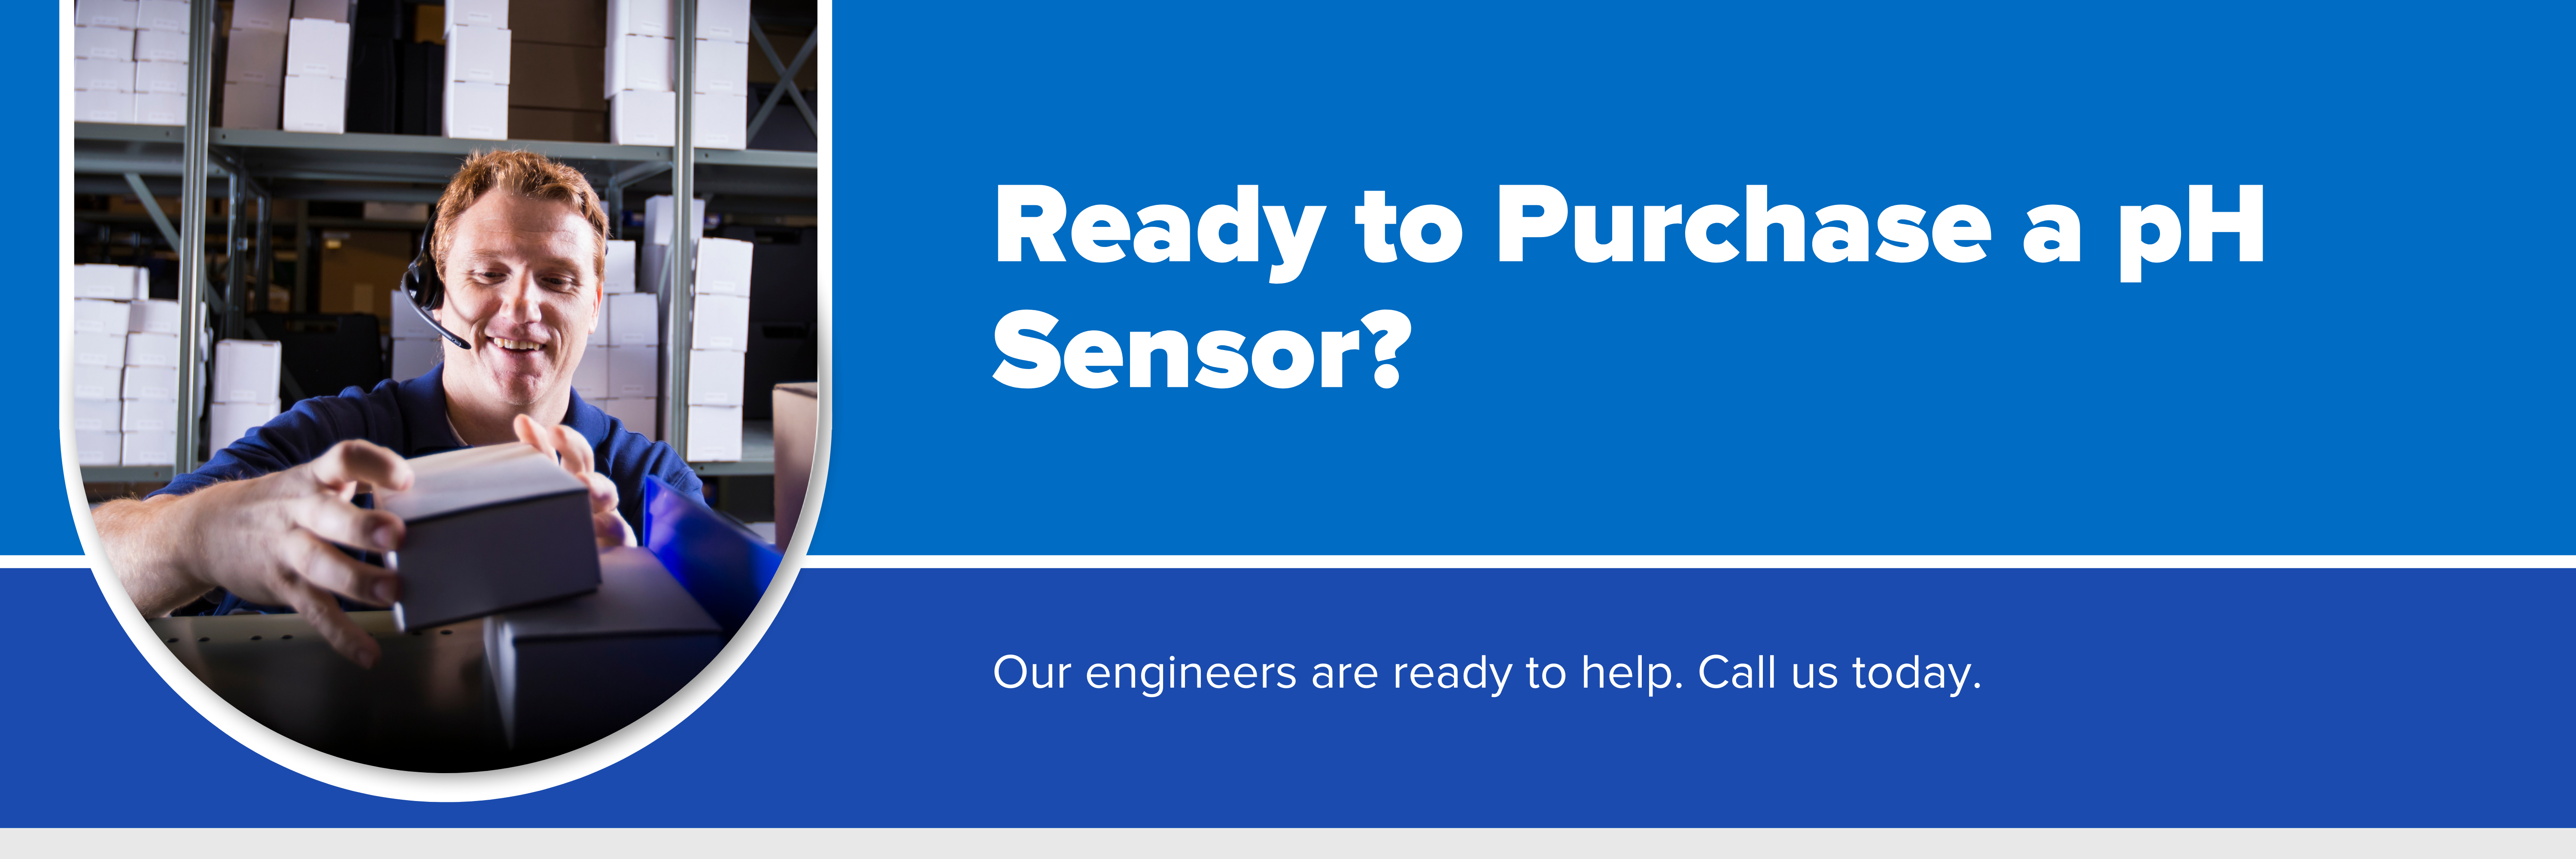 Header image with text 'ready to purchase a pH sensor'?